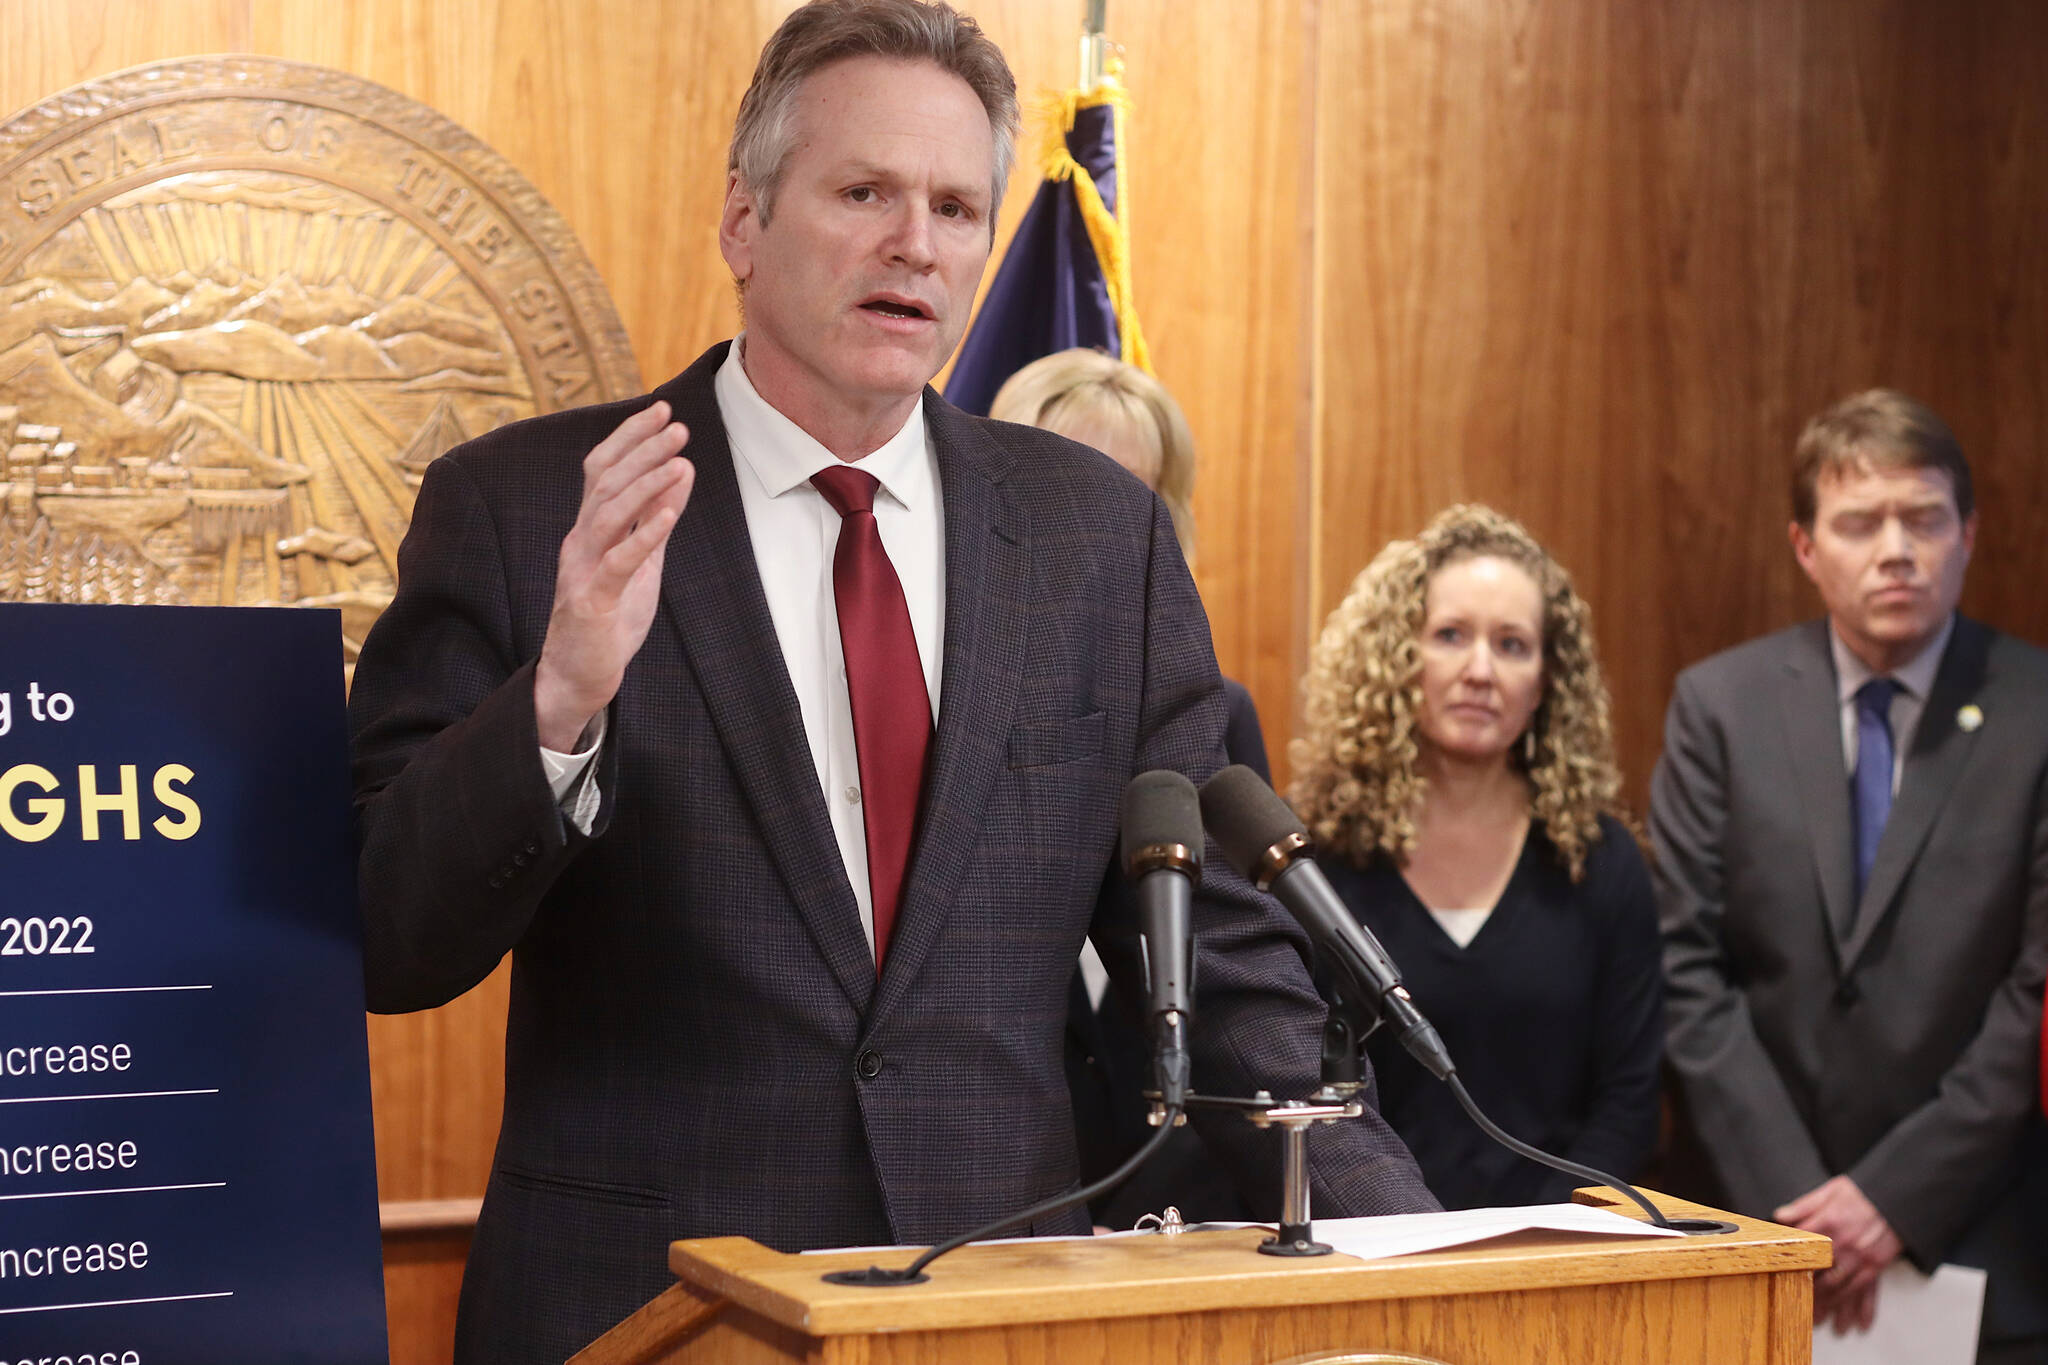 Gov. Mike Dunleavy discusses his proposed budget for the 2024 fiscal year during a press conference Thursday at the Alaska State Capitol. He said it features no major increases or reductions compared to the current year’s budget, incurs about a $265 million deficit covered with reserve funds, and includes a “full PFD” projected to be about $3,800. (Mark Sabbatini / Juneau Empire).